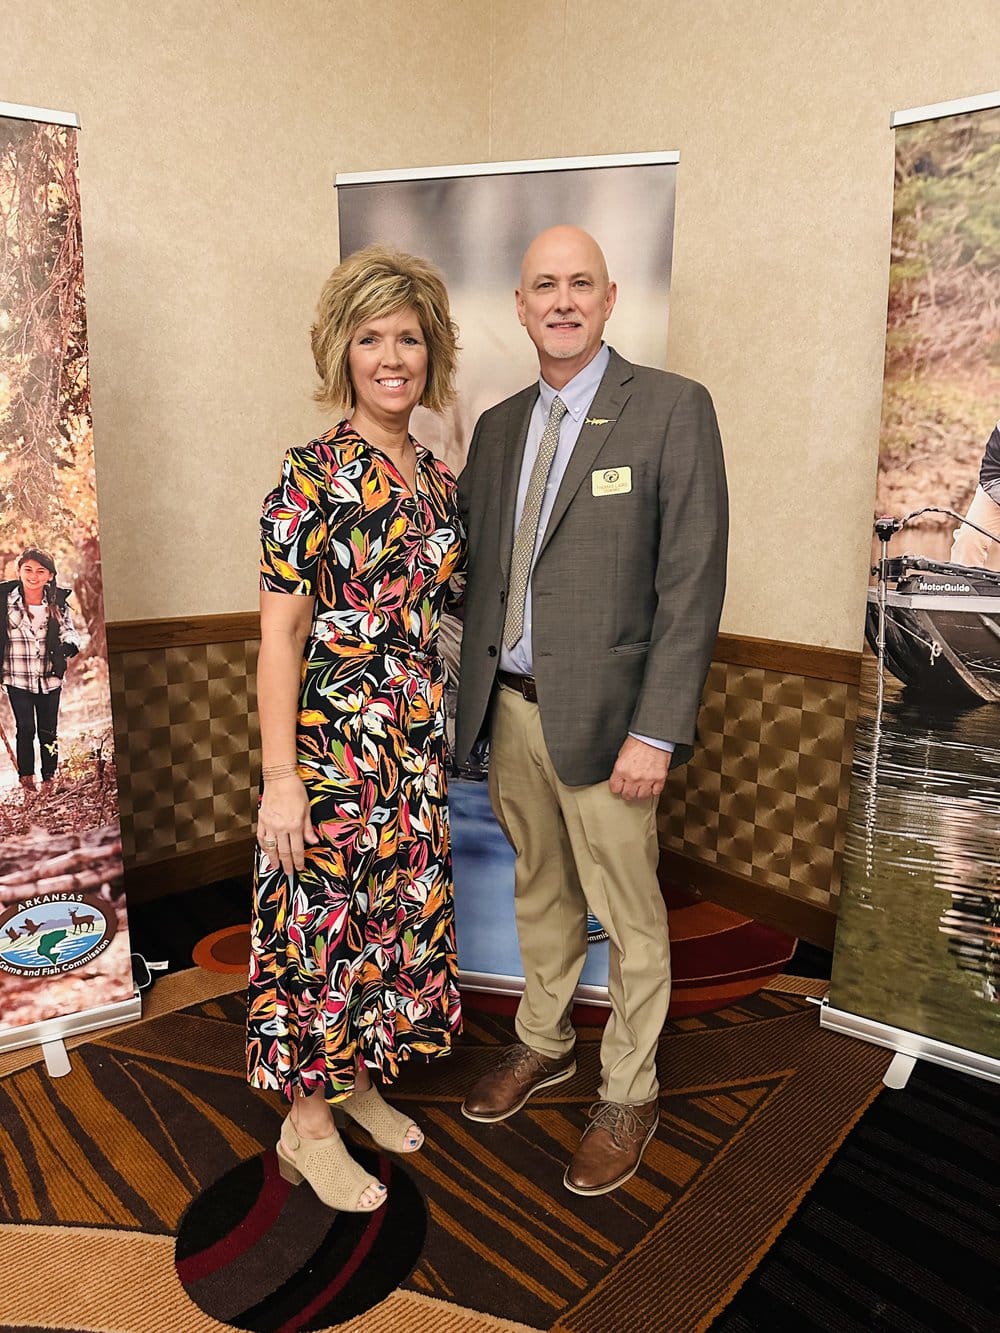 Laird and his wife, Stephanie, have been a part of the AGFC family for more than 30 years.